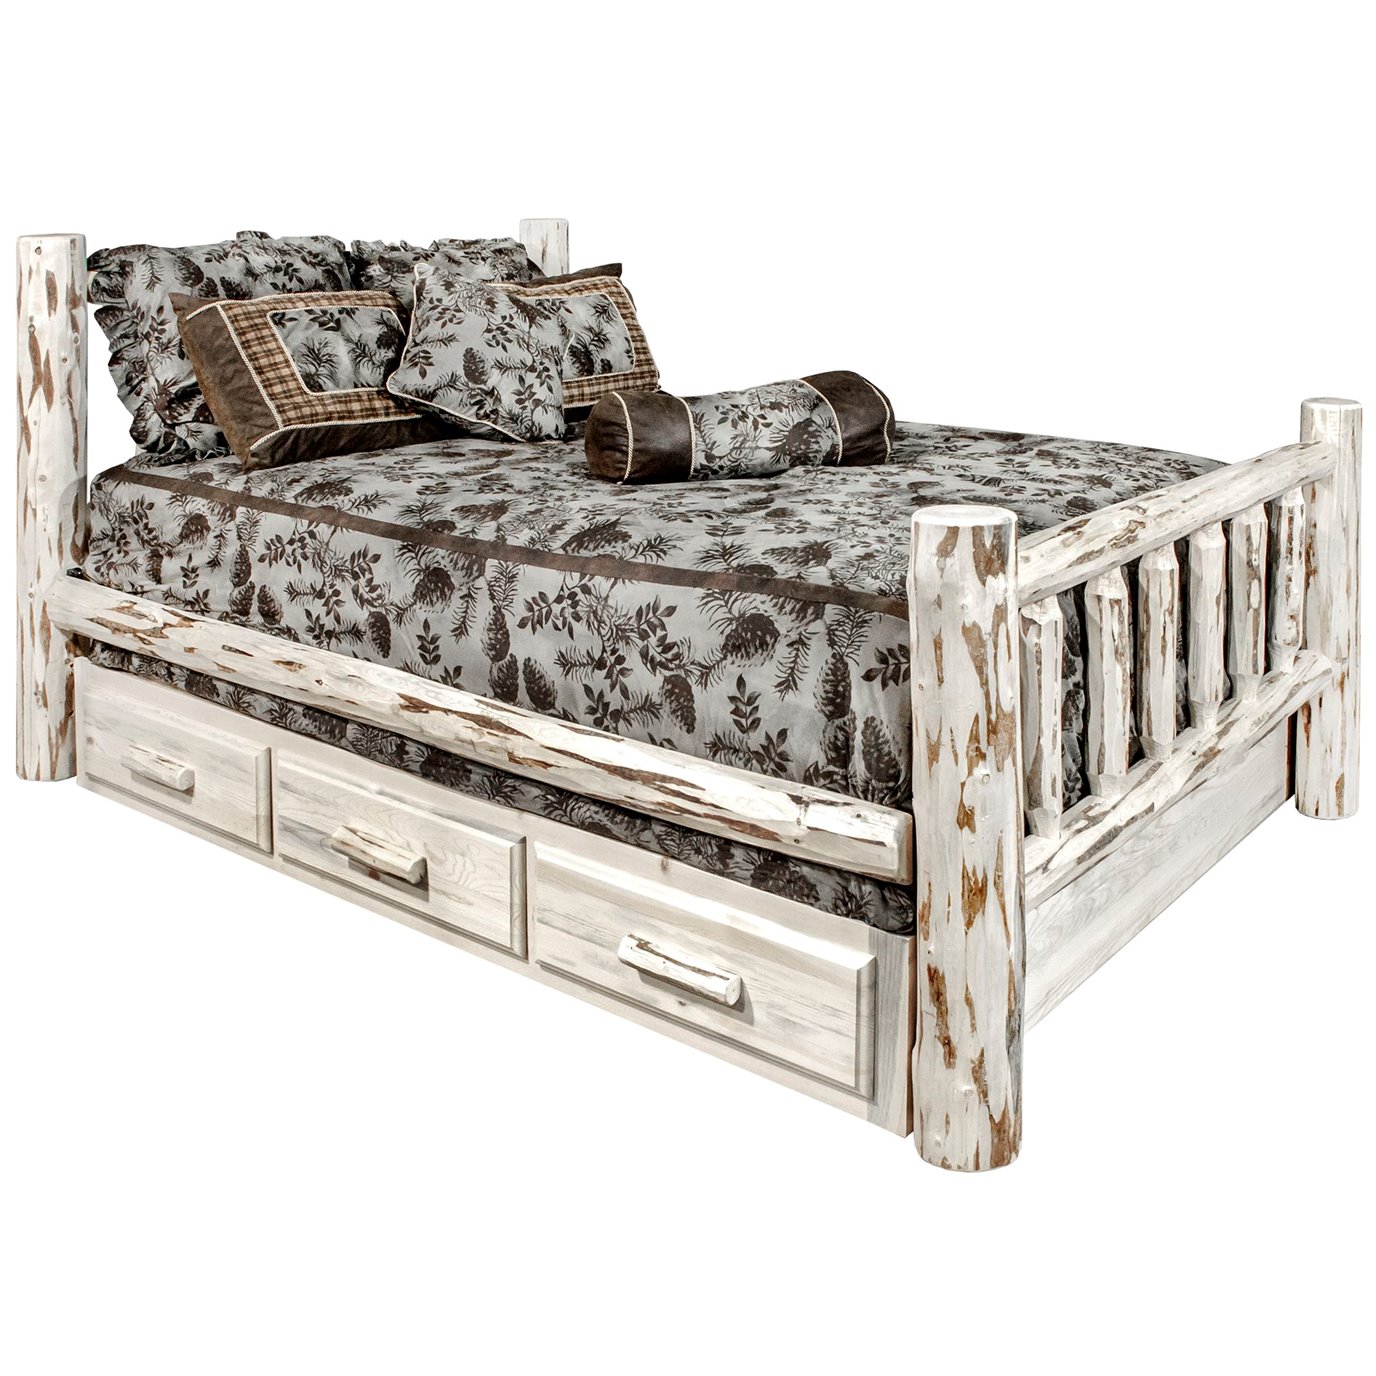 Montana King Bed w/ Storage - Clear Lacquer Finish